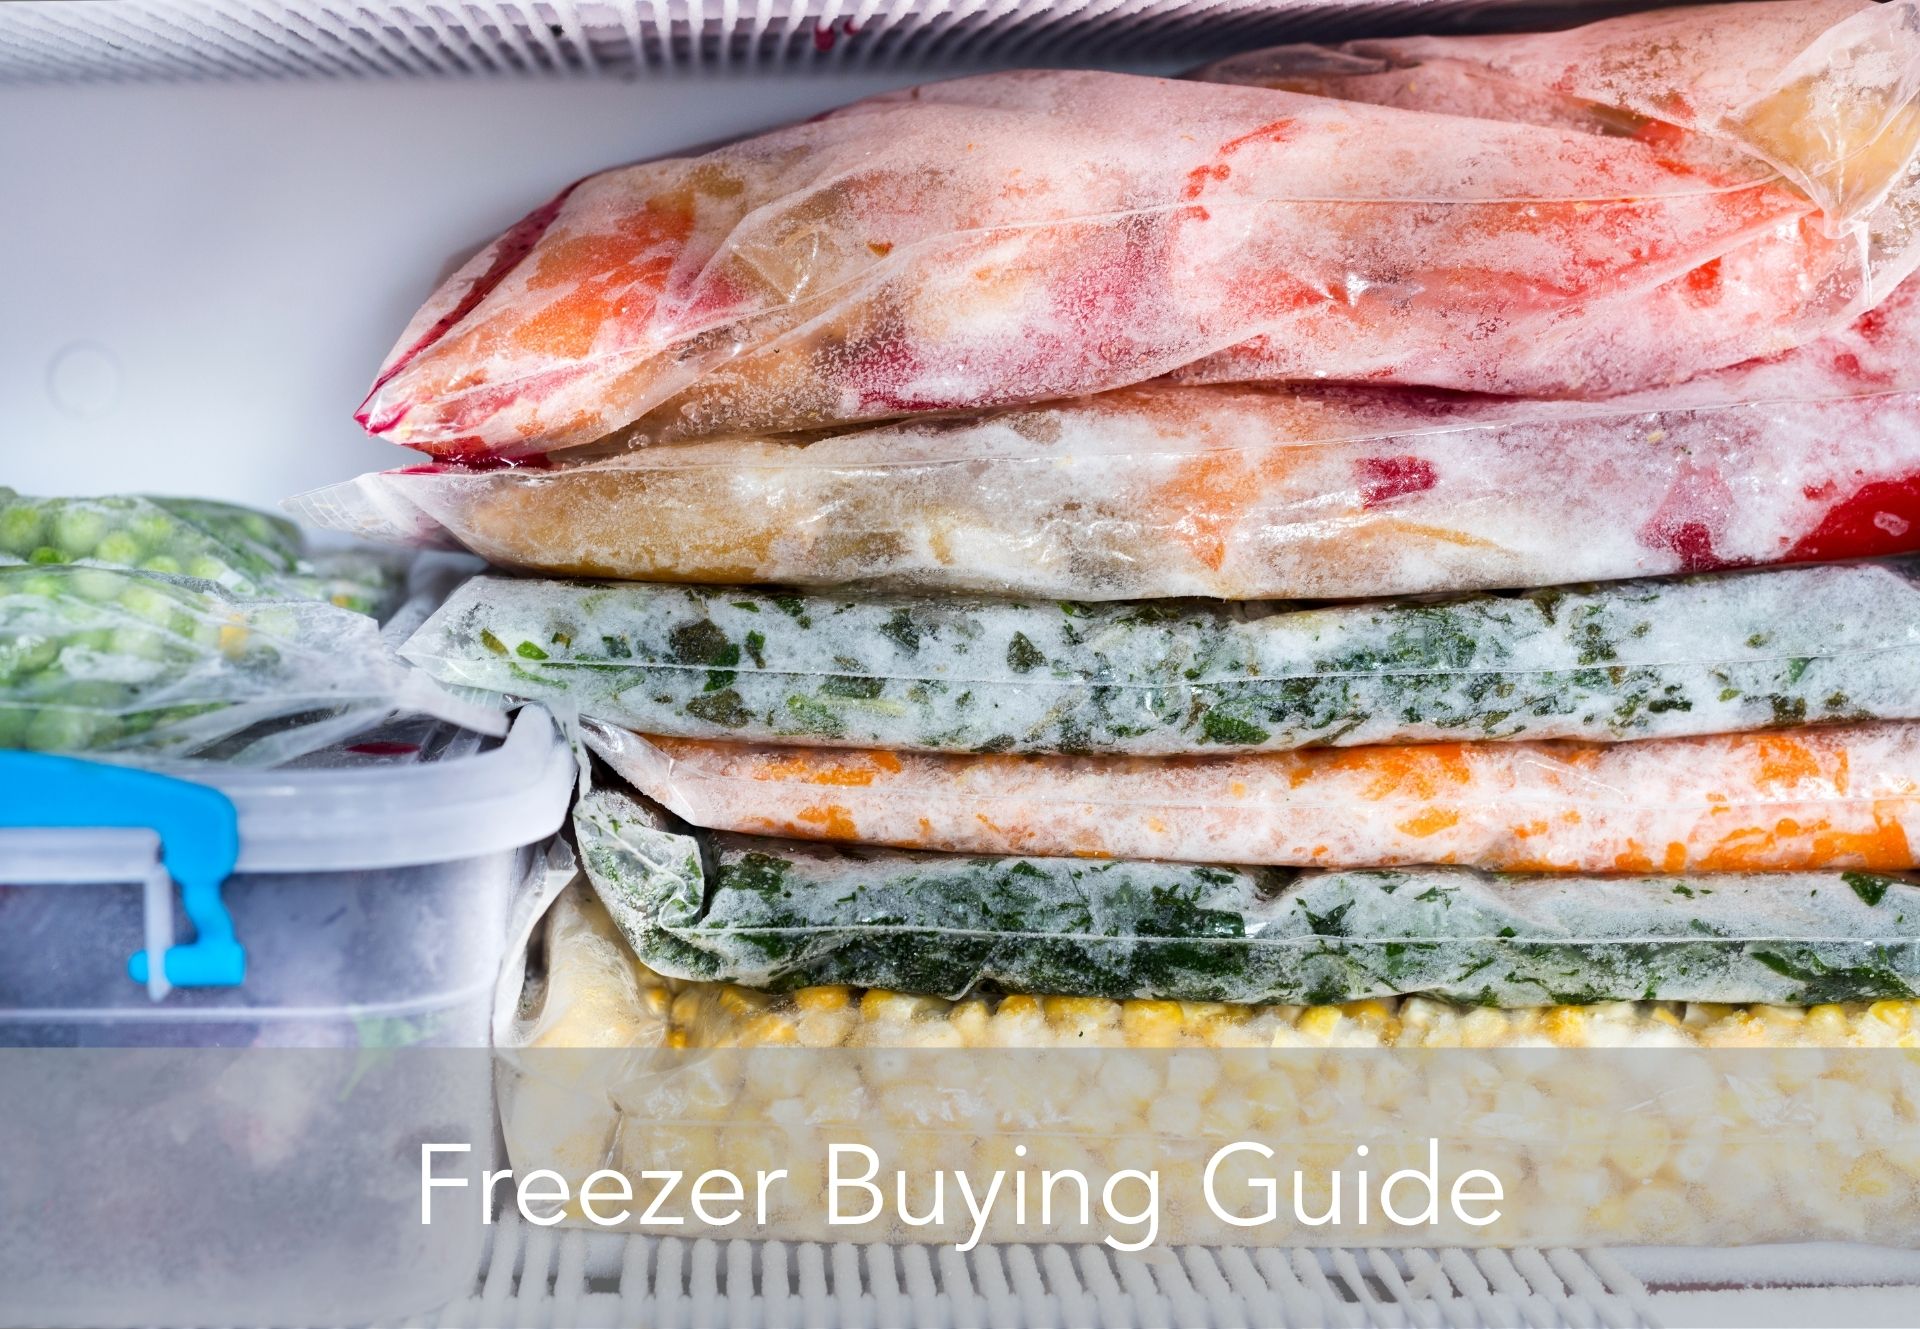 Freezer Buying Guide - Appliances Delivered